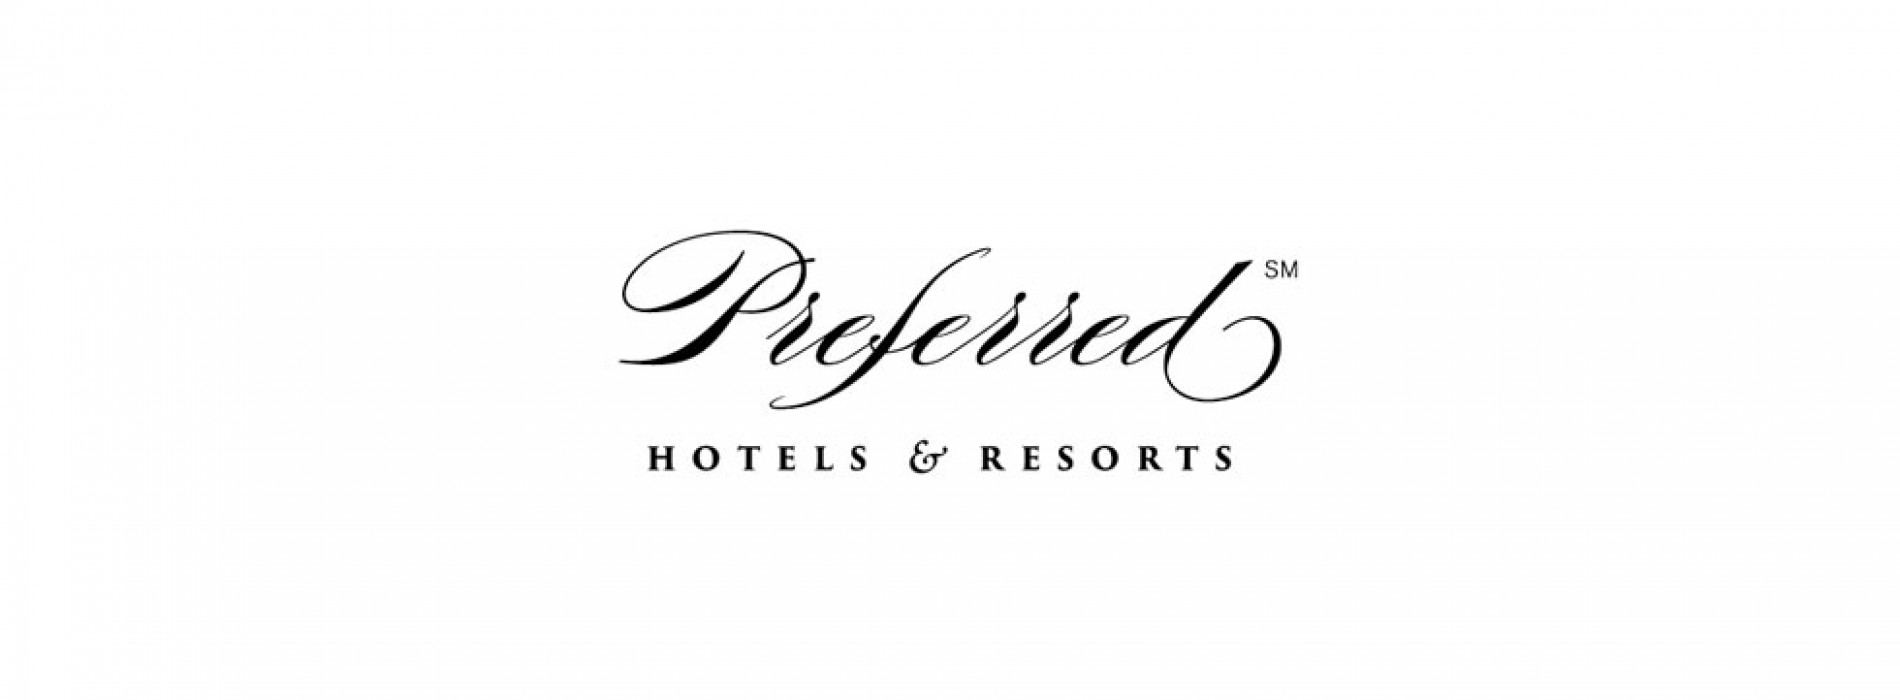 Preferred Hotels & Resorts announces 2015 year-end result